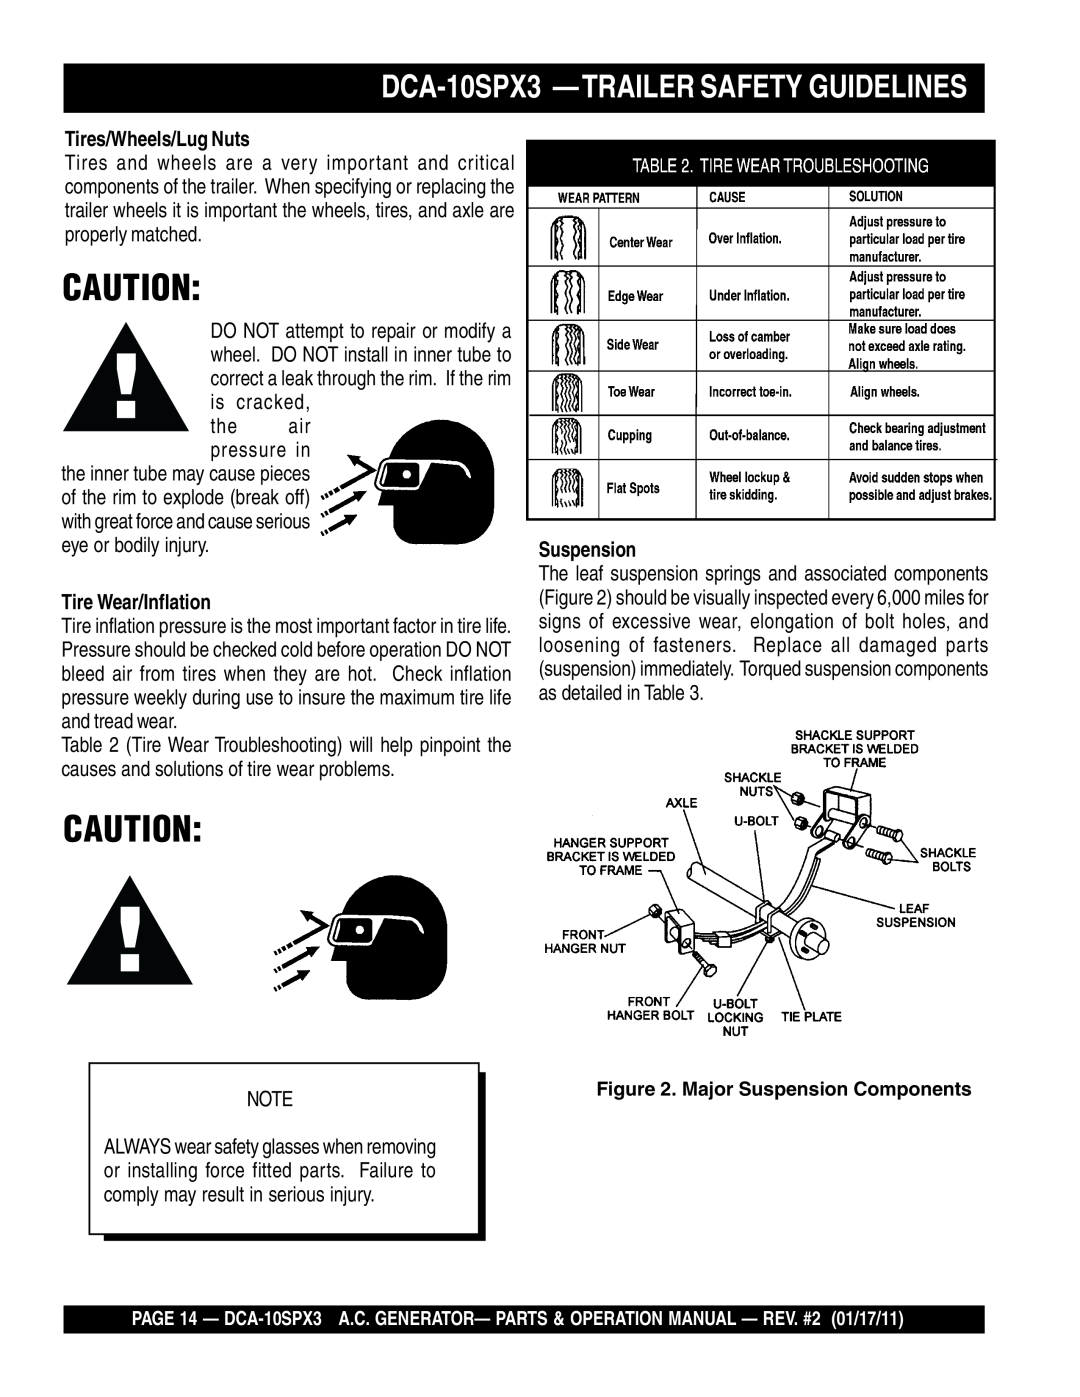 Multiquip DCA10SPX3 manual DCA-10SPX3 -TRAILER SAFETY GUIDELINES, Tires/Wheels/Lug Nuts, Tire Wear/Inflation, Suspension 